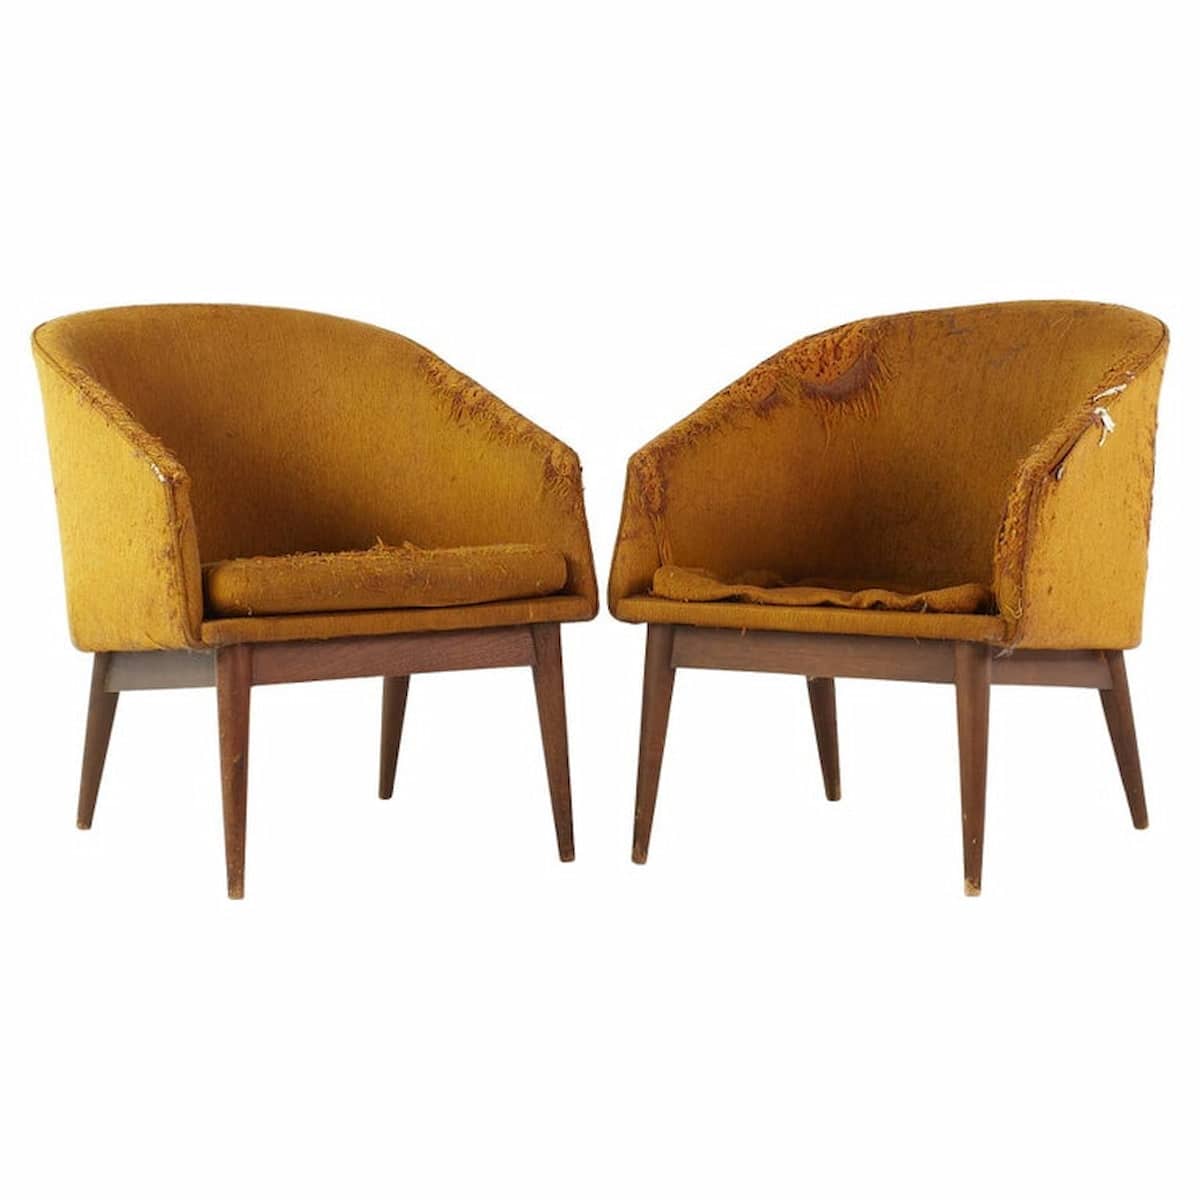 Lawrence Peabody for Craft Associates Mid Century Walnut Lounge Chairs - Pair